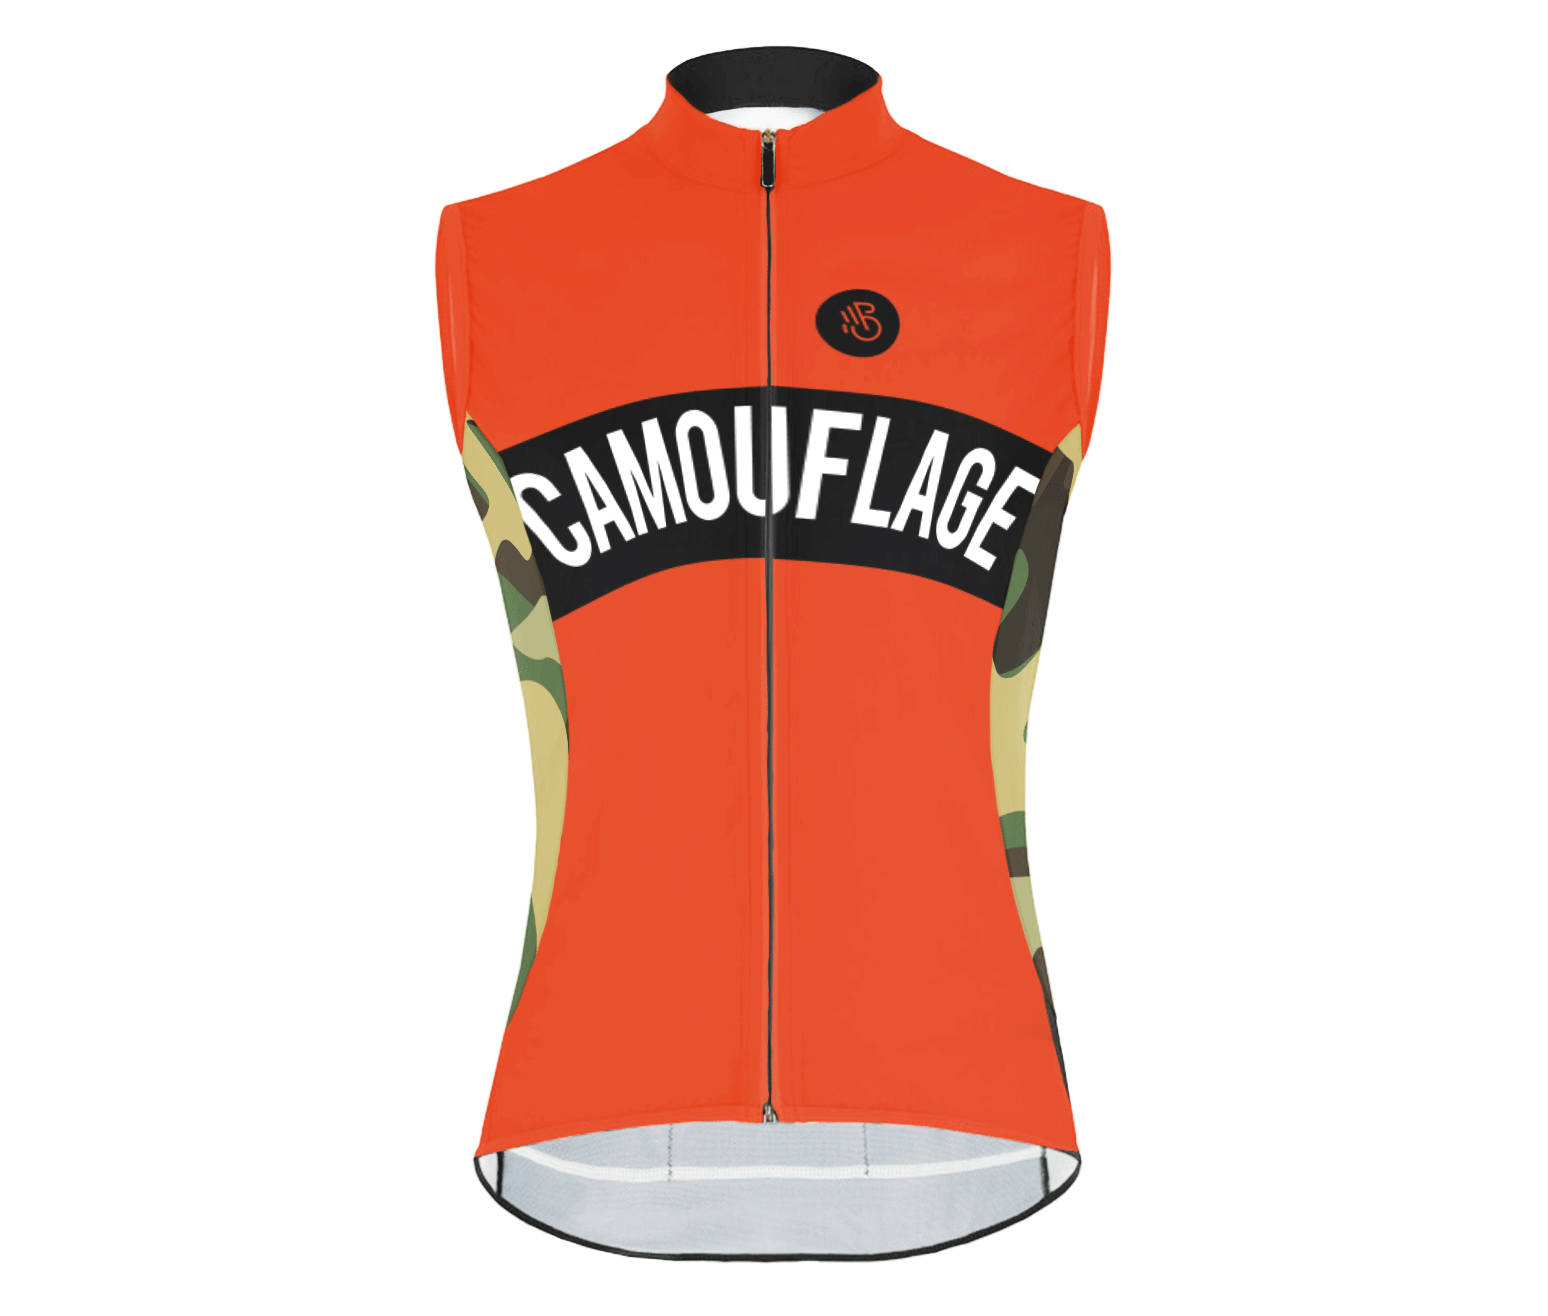 CAMOUFLAGE cycling vest image 1